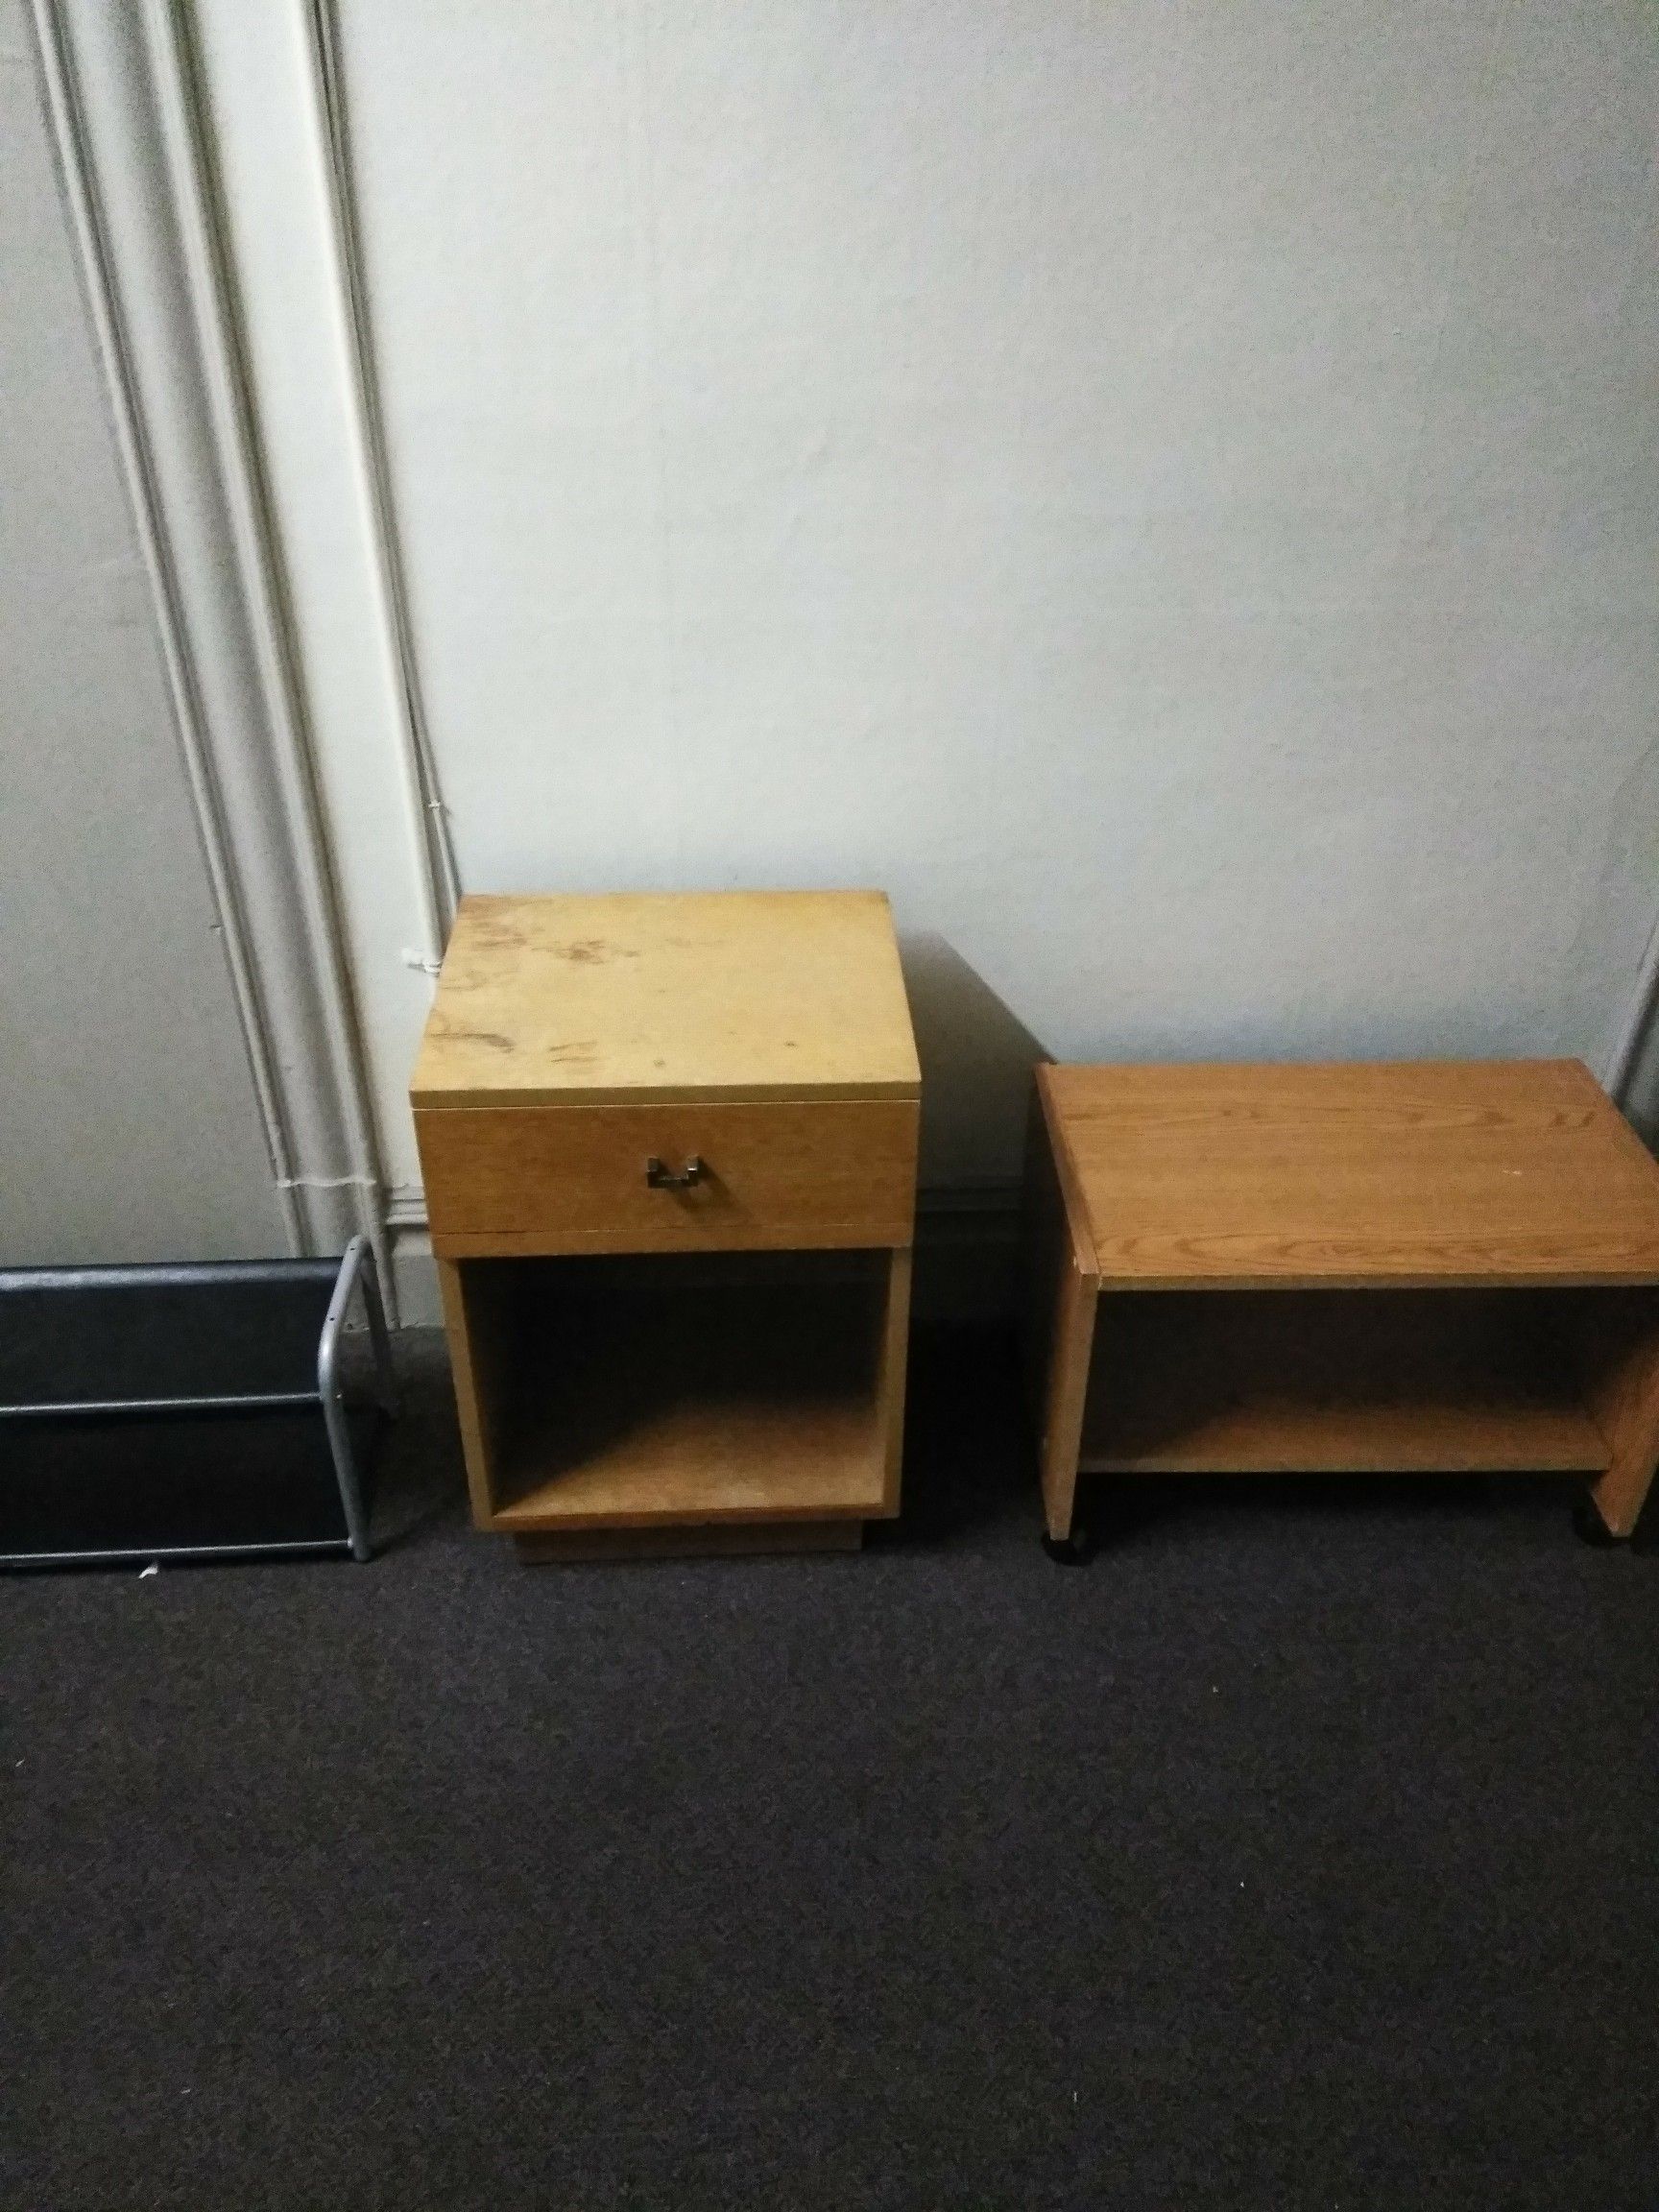 1 wood Night Stand, 1 TV roll TV Stand, and 1 IKEA shoe rack